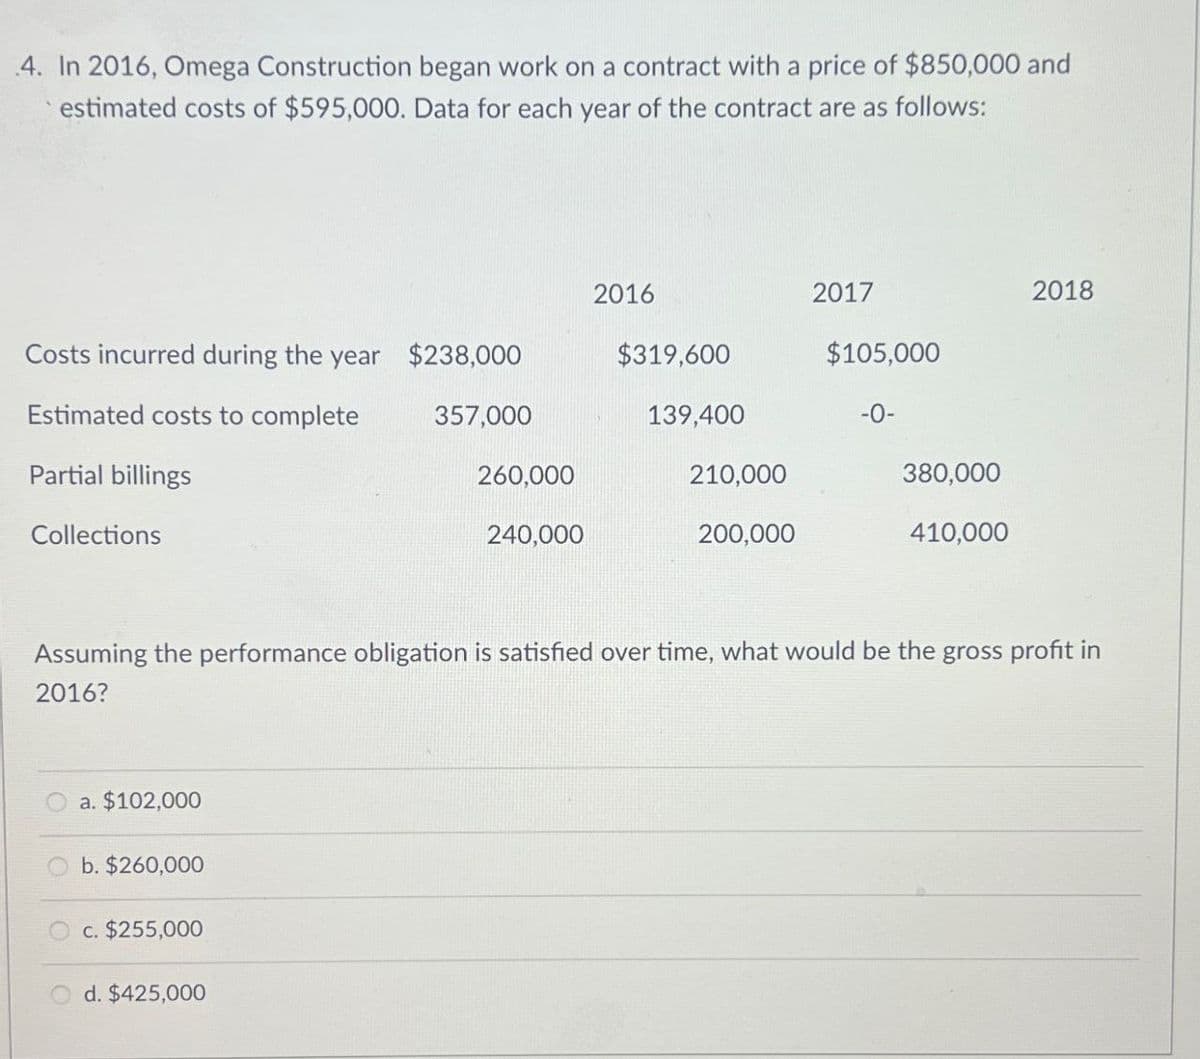 4. In 2016, Omega Construction began work on a contract with a price of $850,000 and
estimated costs of $595,000. Data for each year of the contract are as follows:
Costs incurred during the year $238,000
Estimated costs to complete
Partial billings
Collections
2016
2017
2018
$319,600
$105,000
357,000
139,400
-0-
260,000
210,000
380,000
240,000
200,000
410,000
Assuming the performance obligation is satisfied over time, what would be the gross profit in
2016?
a. $102,000
b. $260,000
c. $255,000
d. $425,000